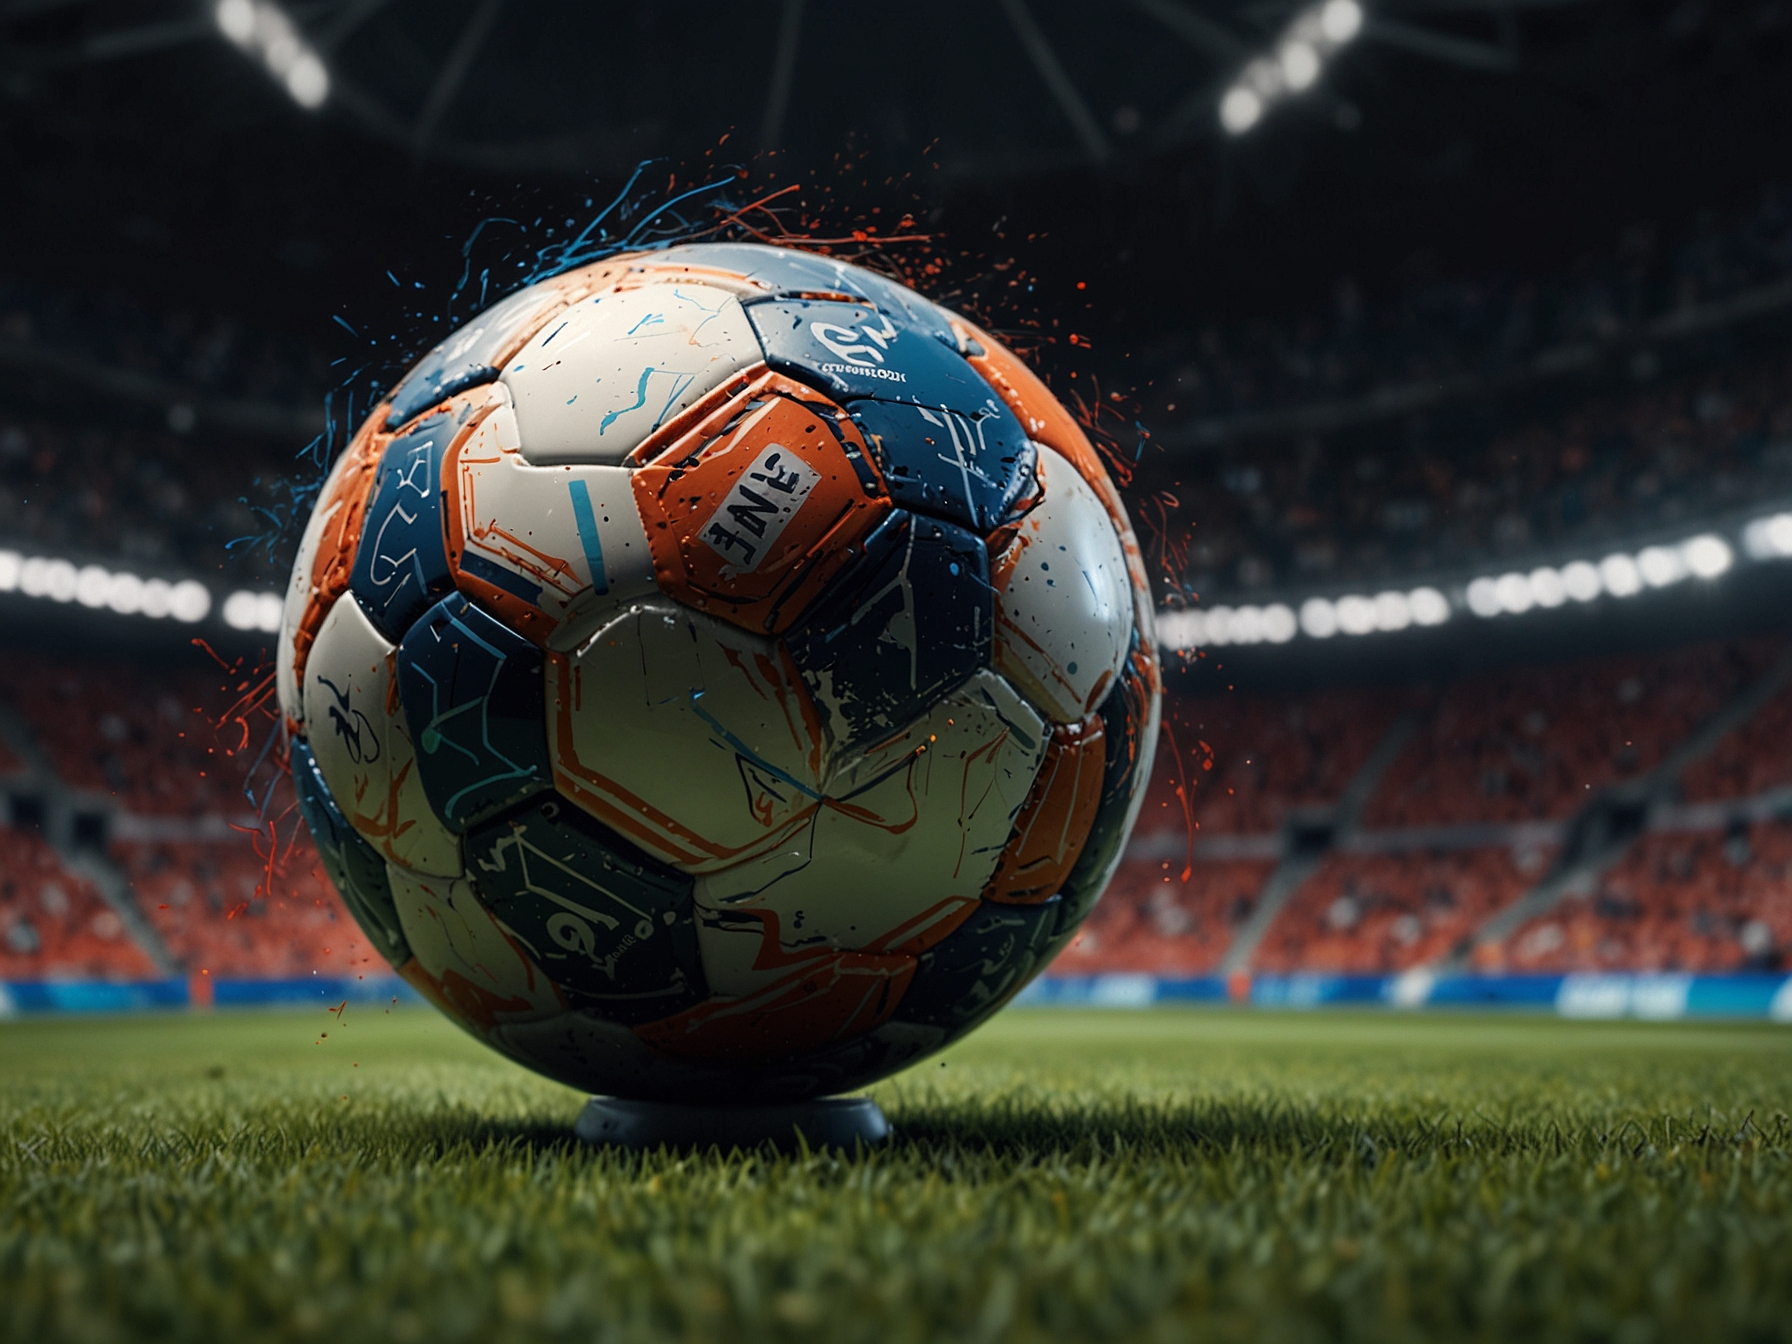 An image of a smart-enabled match ball embedded with sensors, transmitting real-time data on speed, trajectory, and spin during a high-stakes Euro 2024 soccer match.